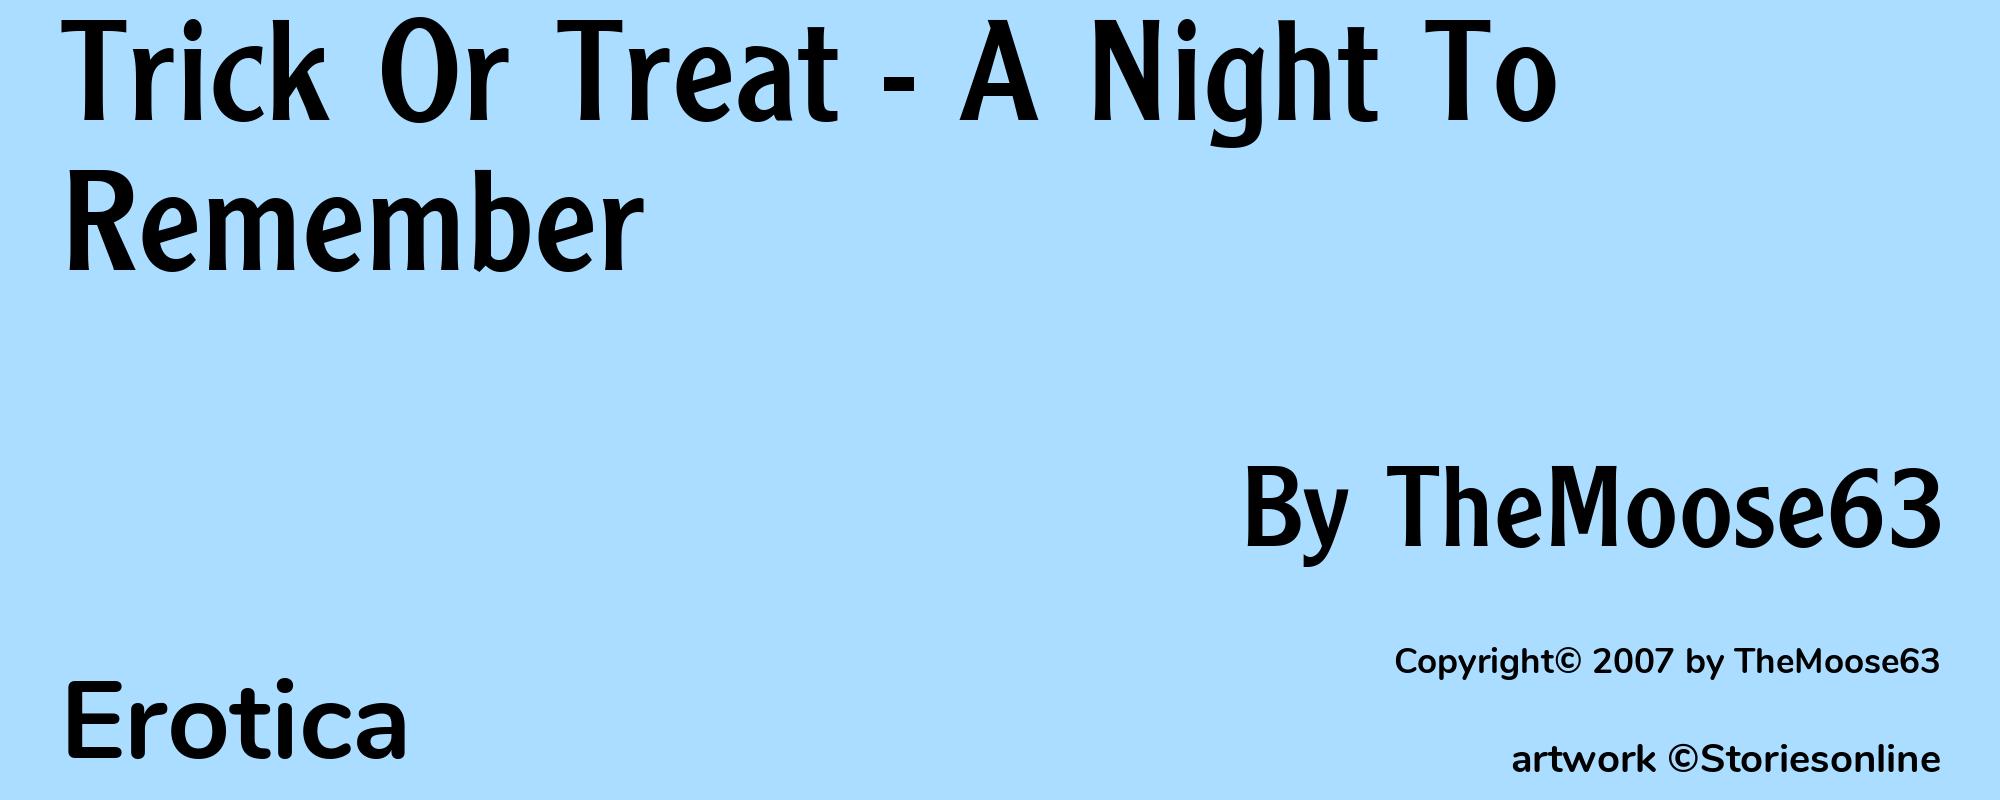 Trick Or Treat - A Night To Remember - Cover